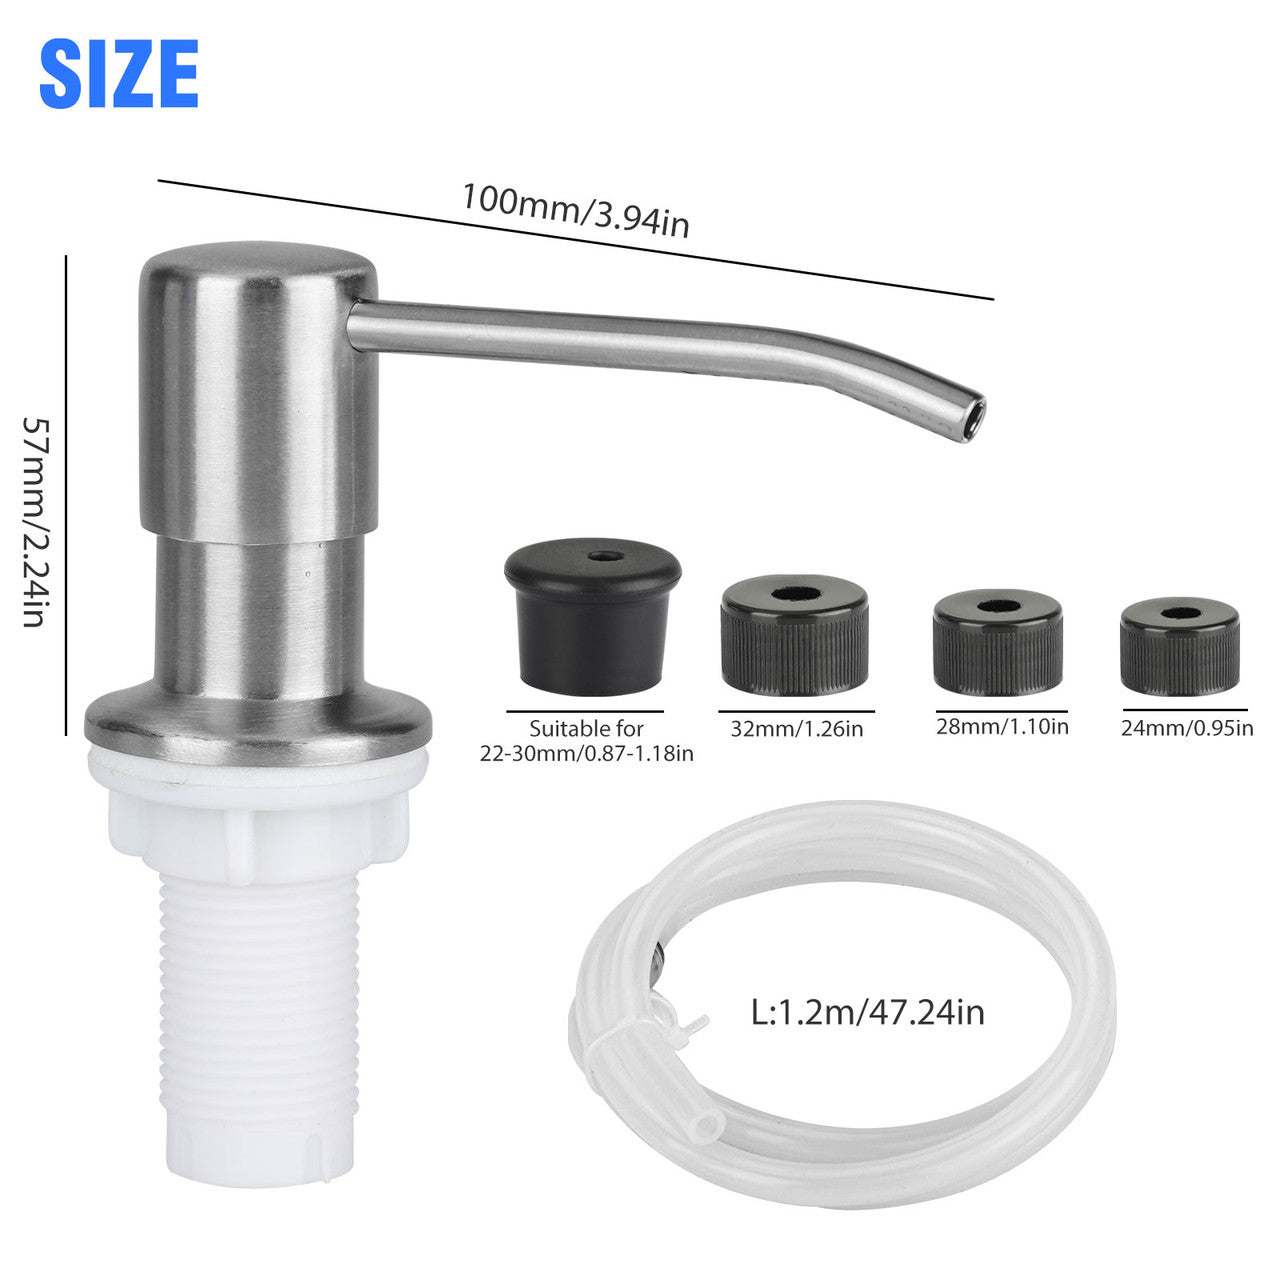 Soap Dispenser Extension 47" Tube Kit for Kitchen Sink and Tube Kit(Brass Brushed Nickel), Stainless Press Head with Silicone Tube Connects Directly to Soap Bottle, No More Refills